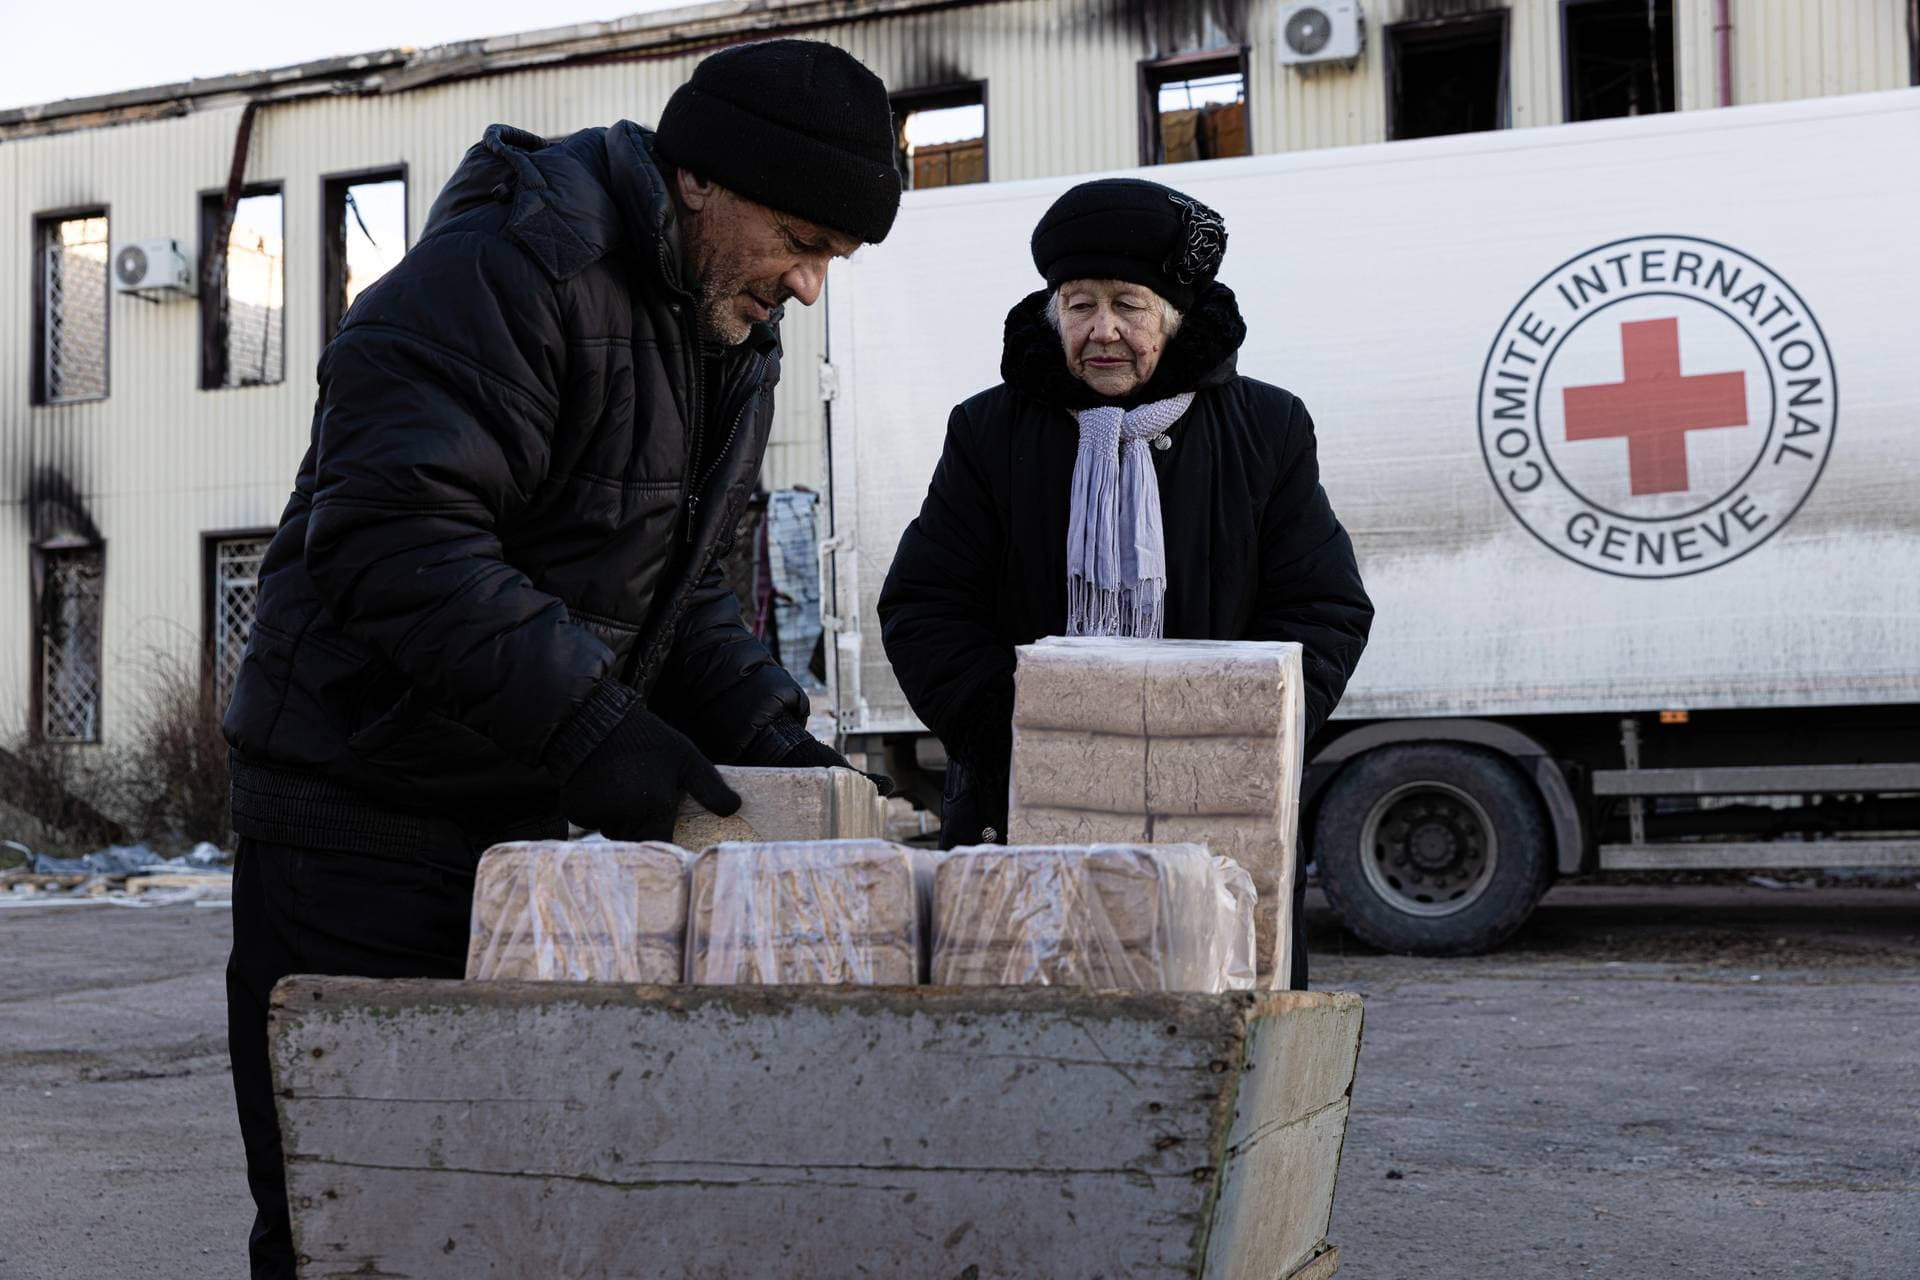 The Red Cross distributes dry fuel bricks in Lyman after mines and unexploded munitions have made collecting firewood a serious challenge